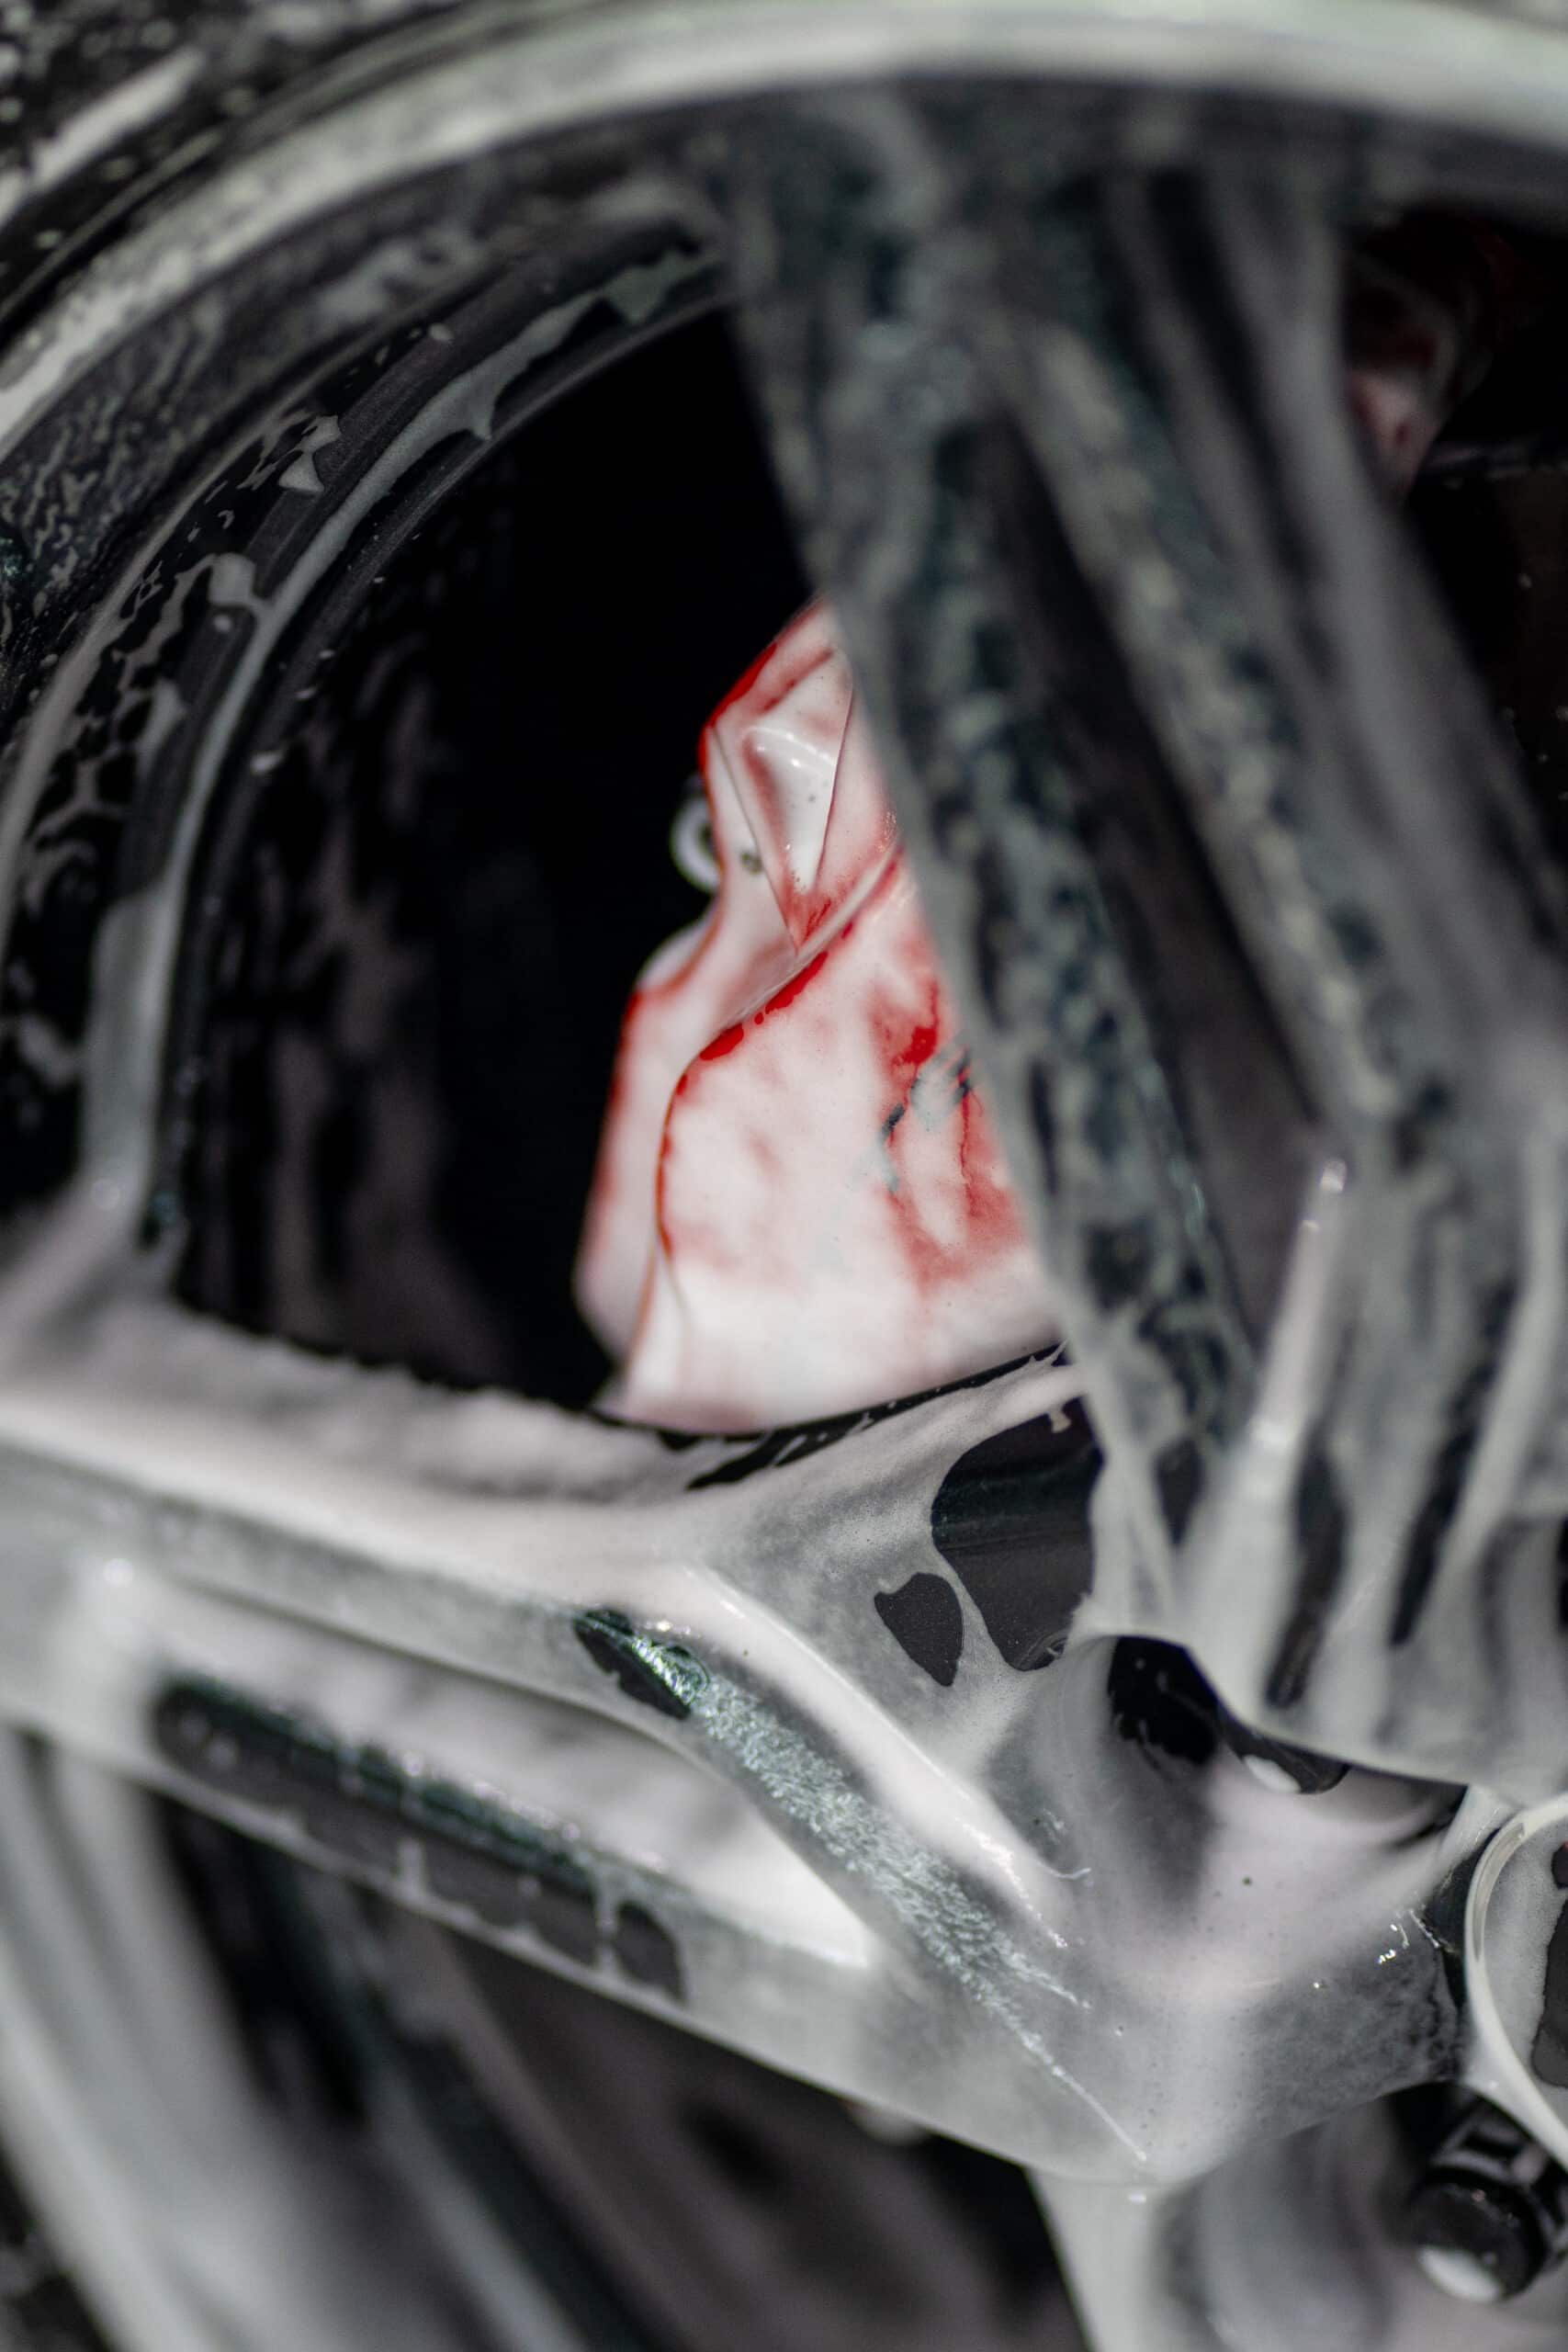 A close up of a car wheel being cleaned with foam.